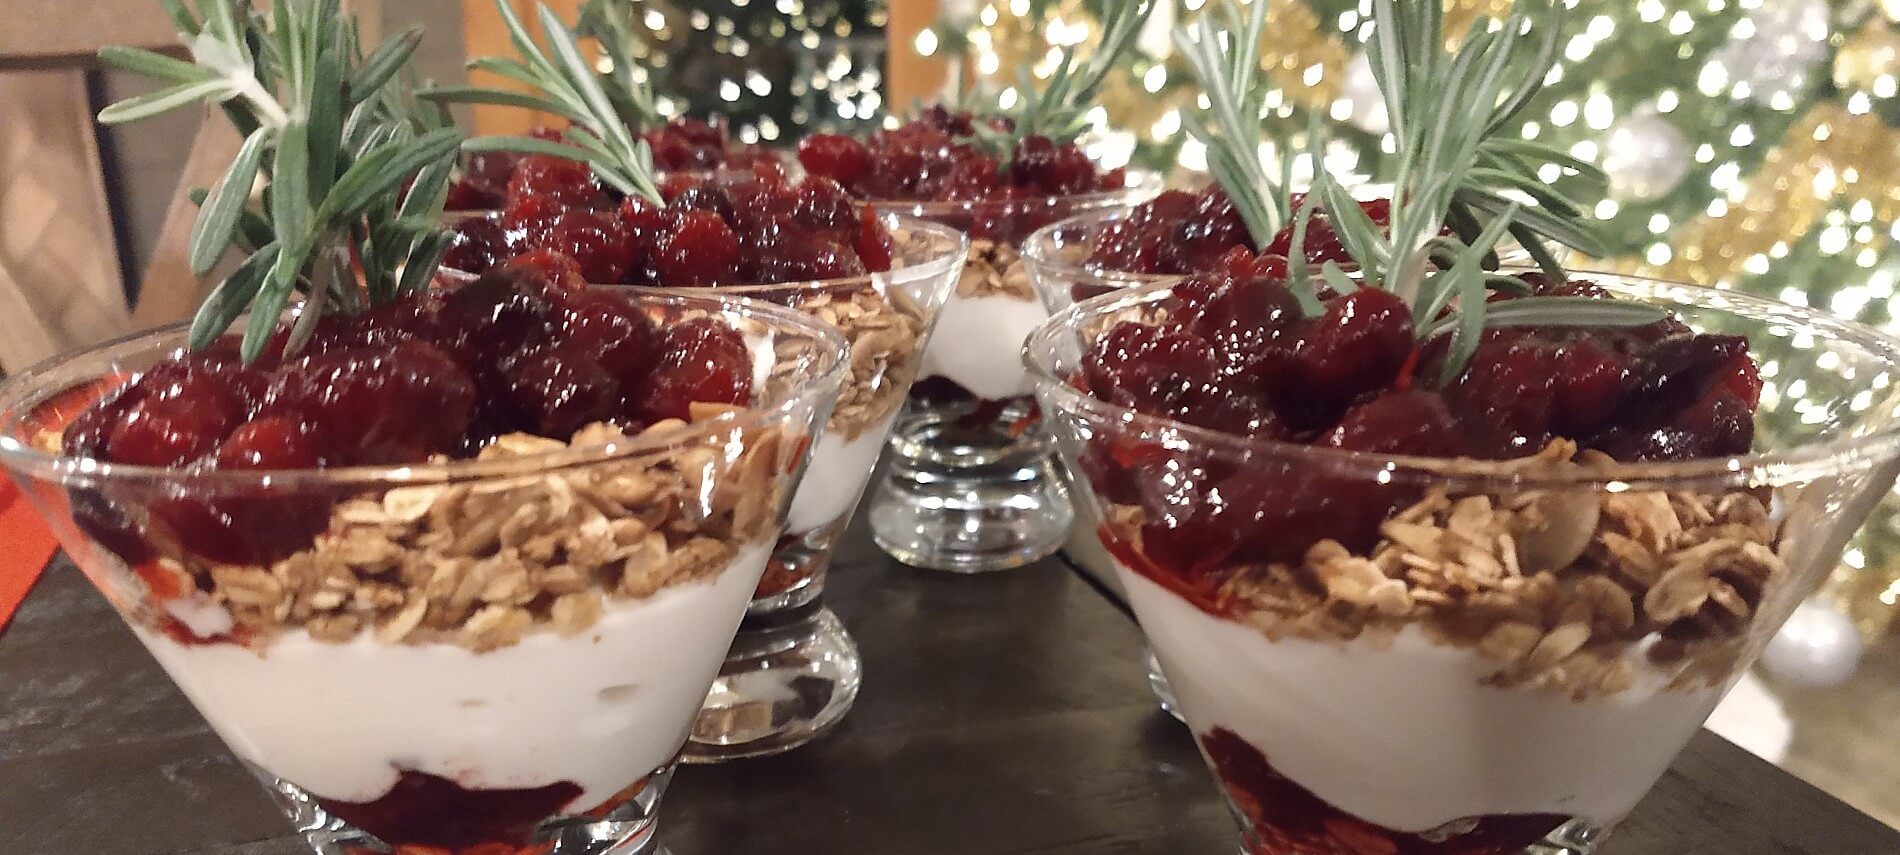 Five glass dishes filled with white yogurt, granola and red cherries on a black table